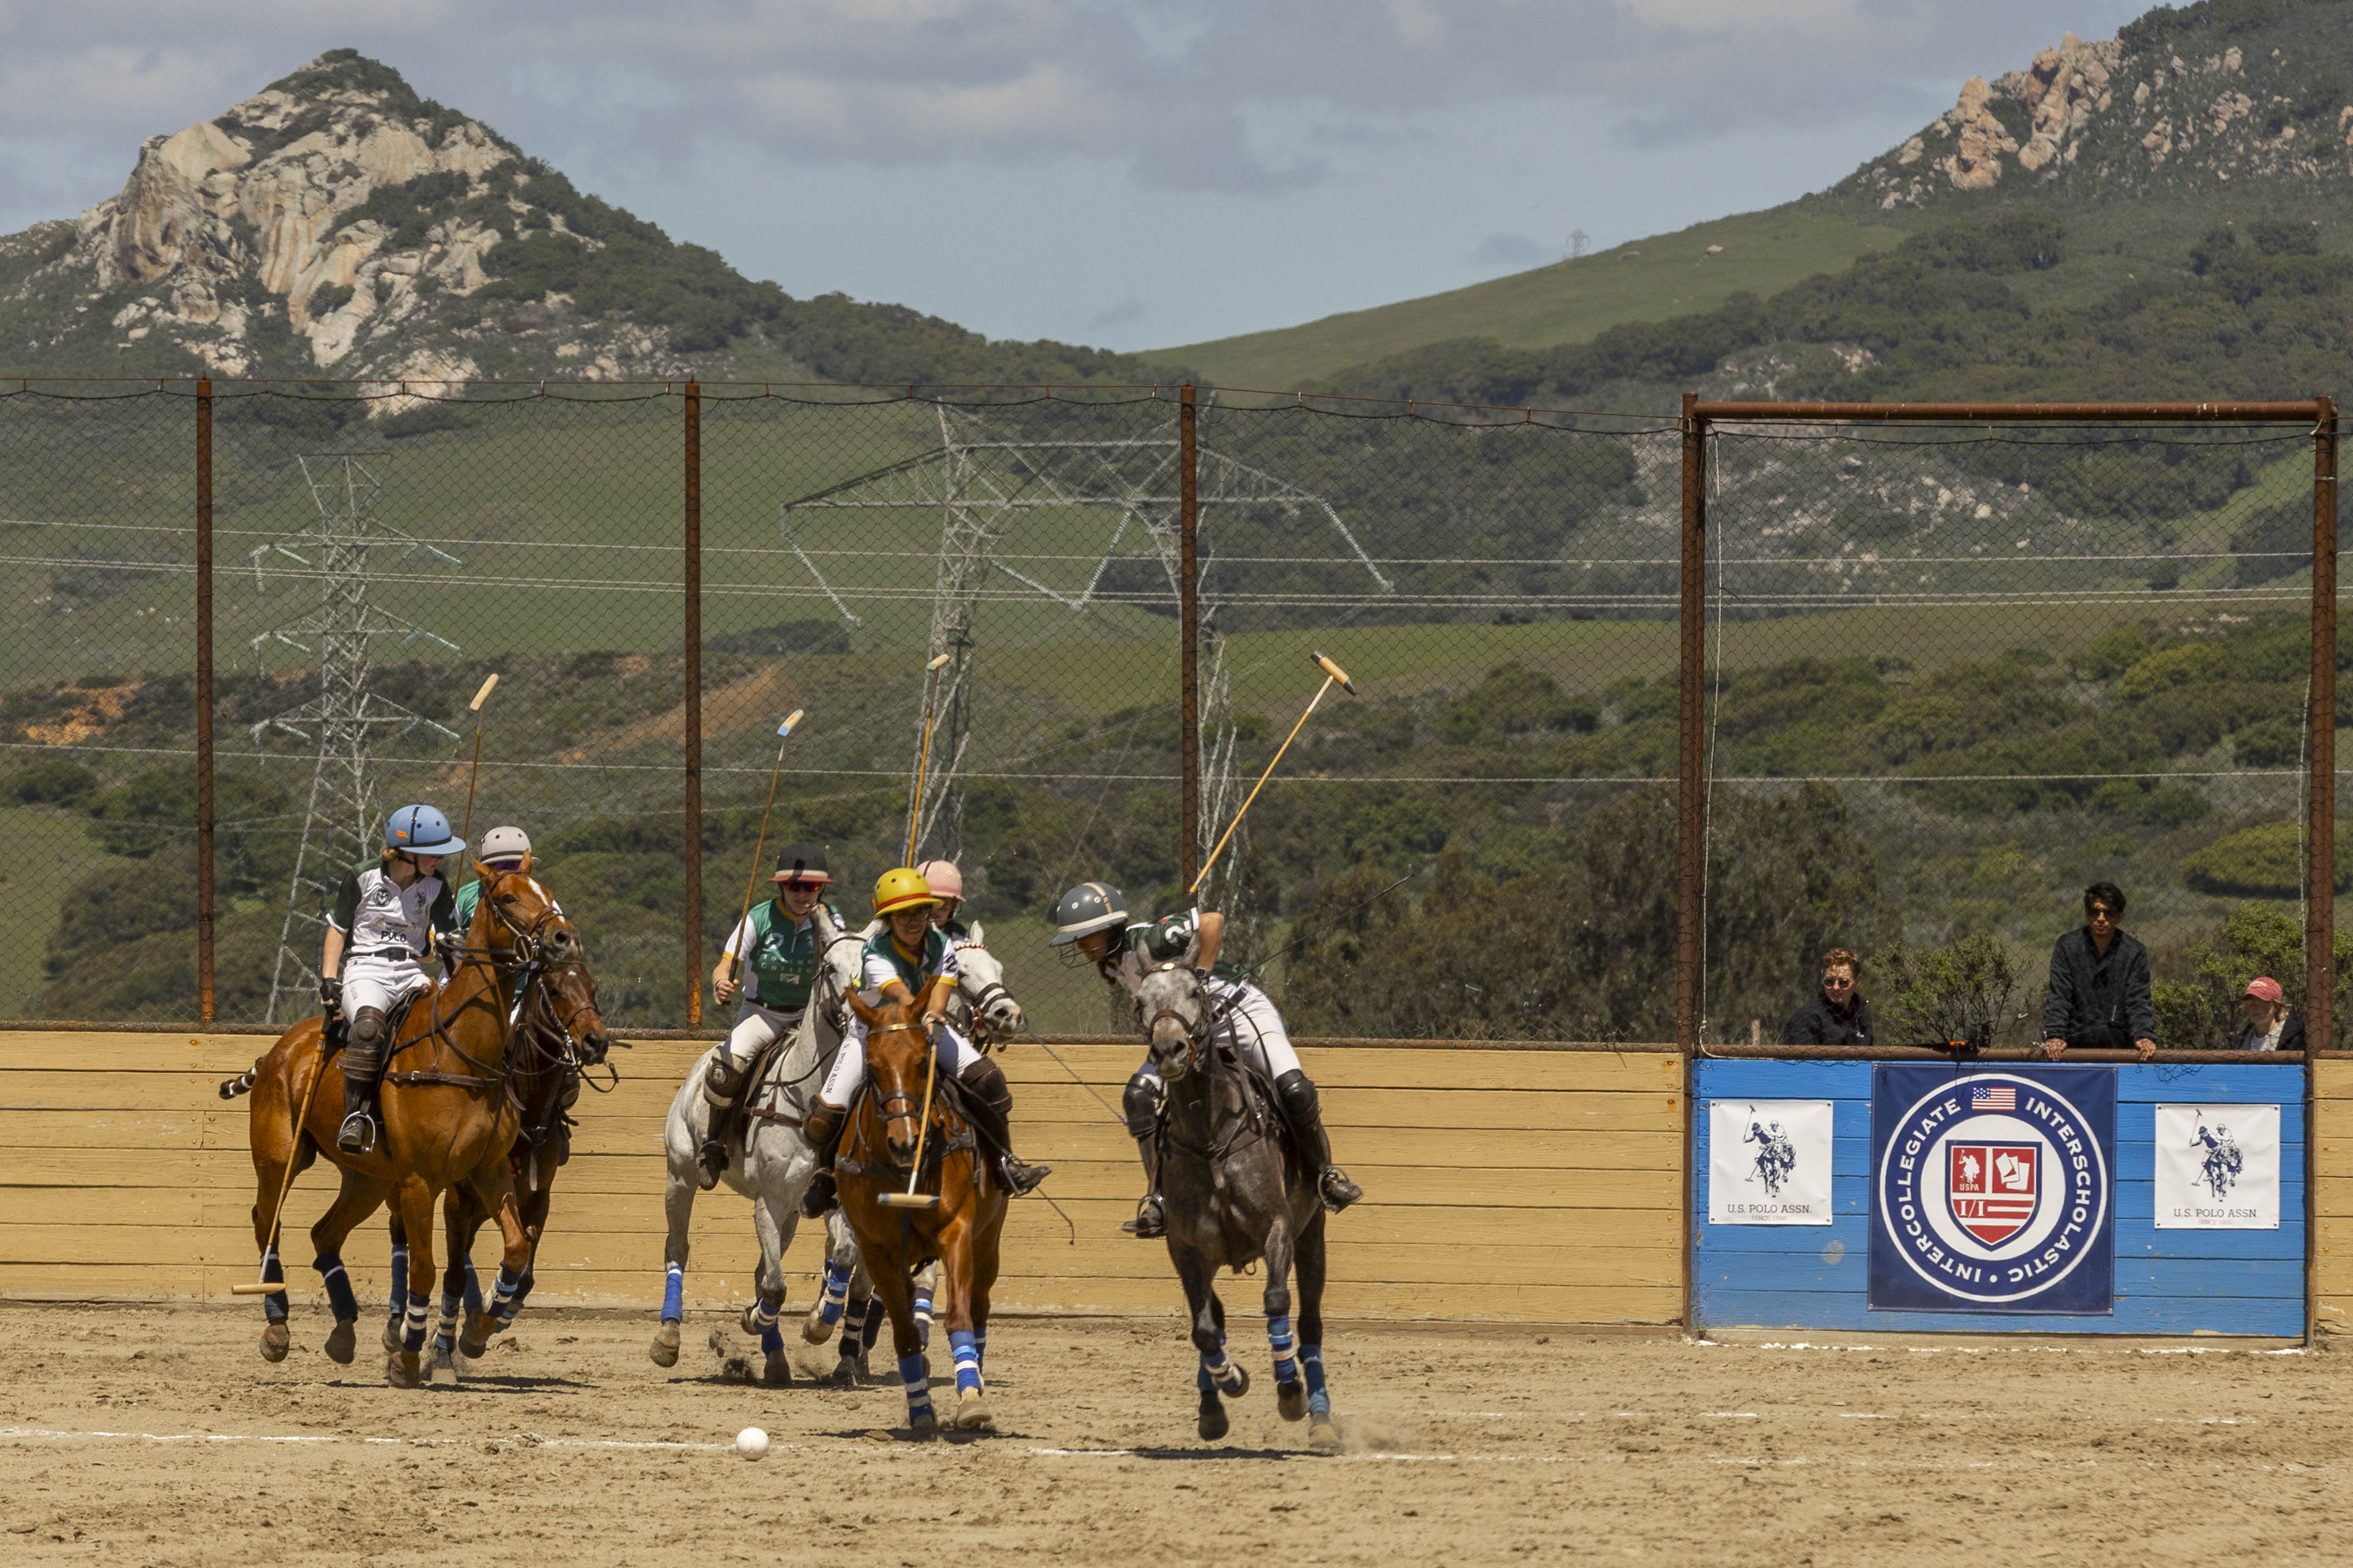 6 polo players ride on horseback in arena with mountains in the background